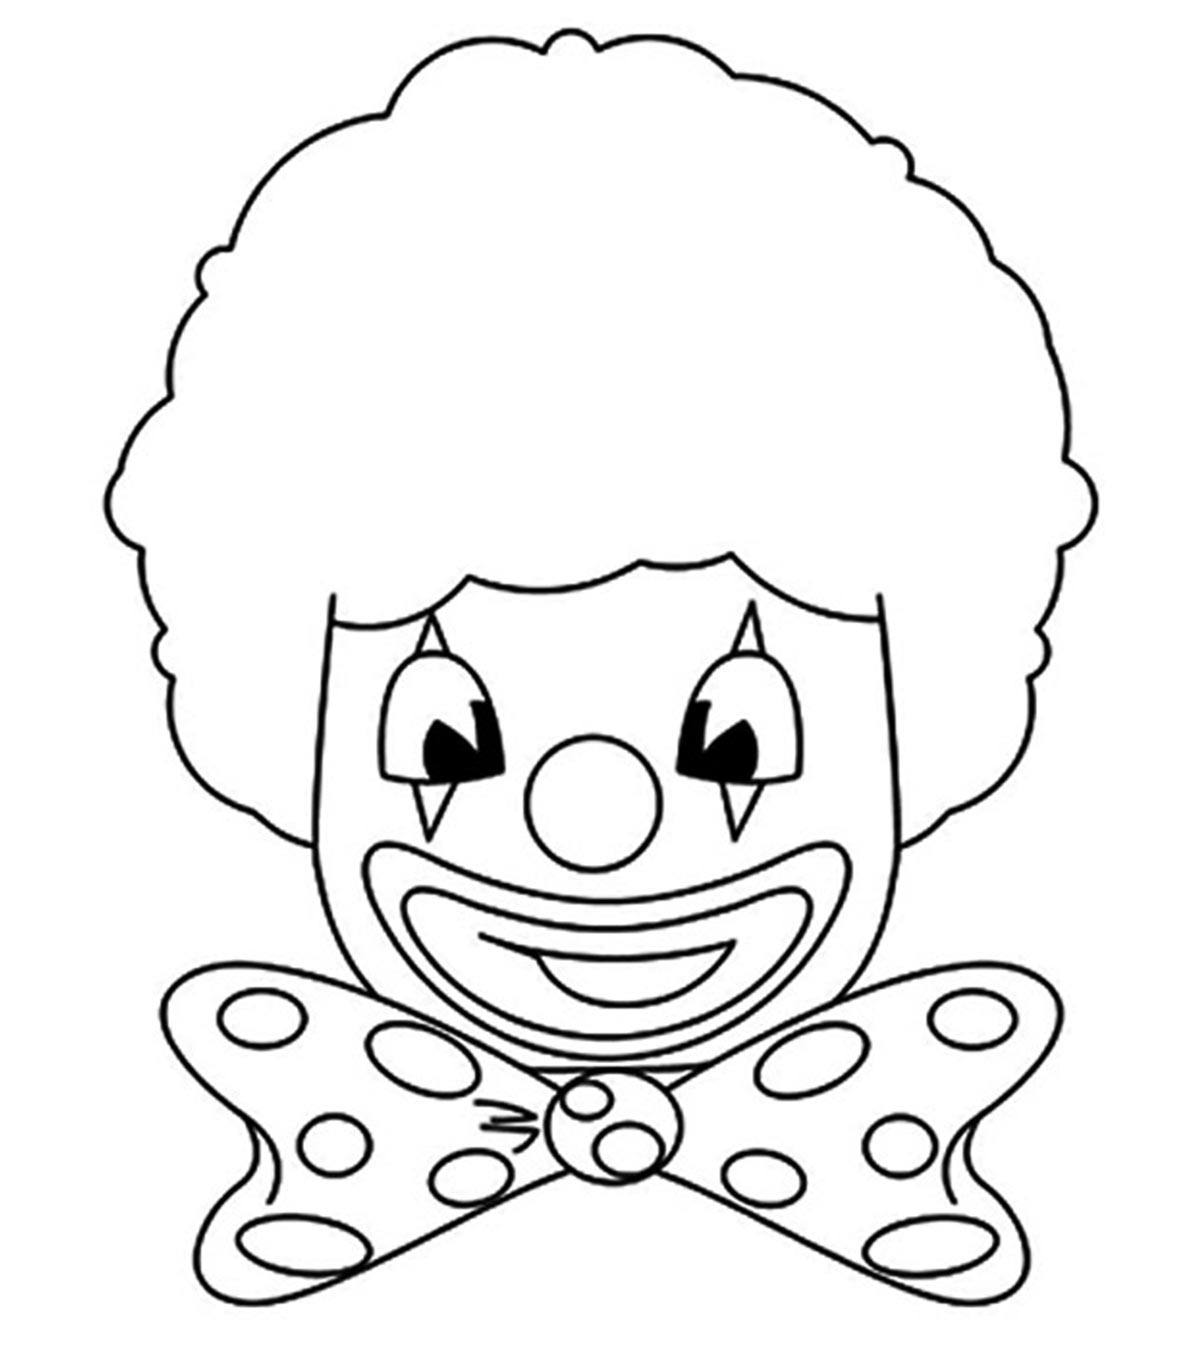 clown face coloring pages